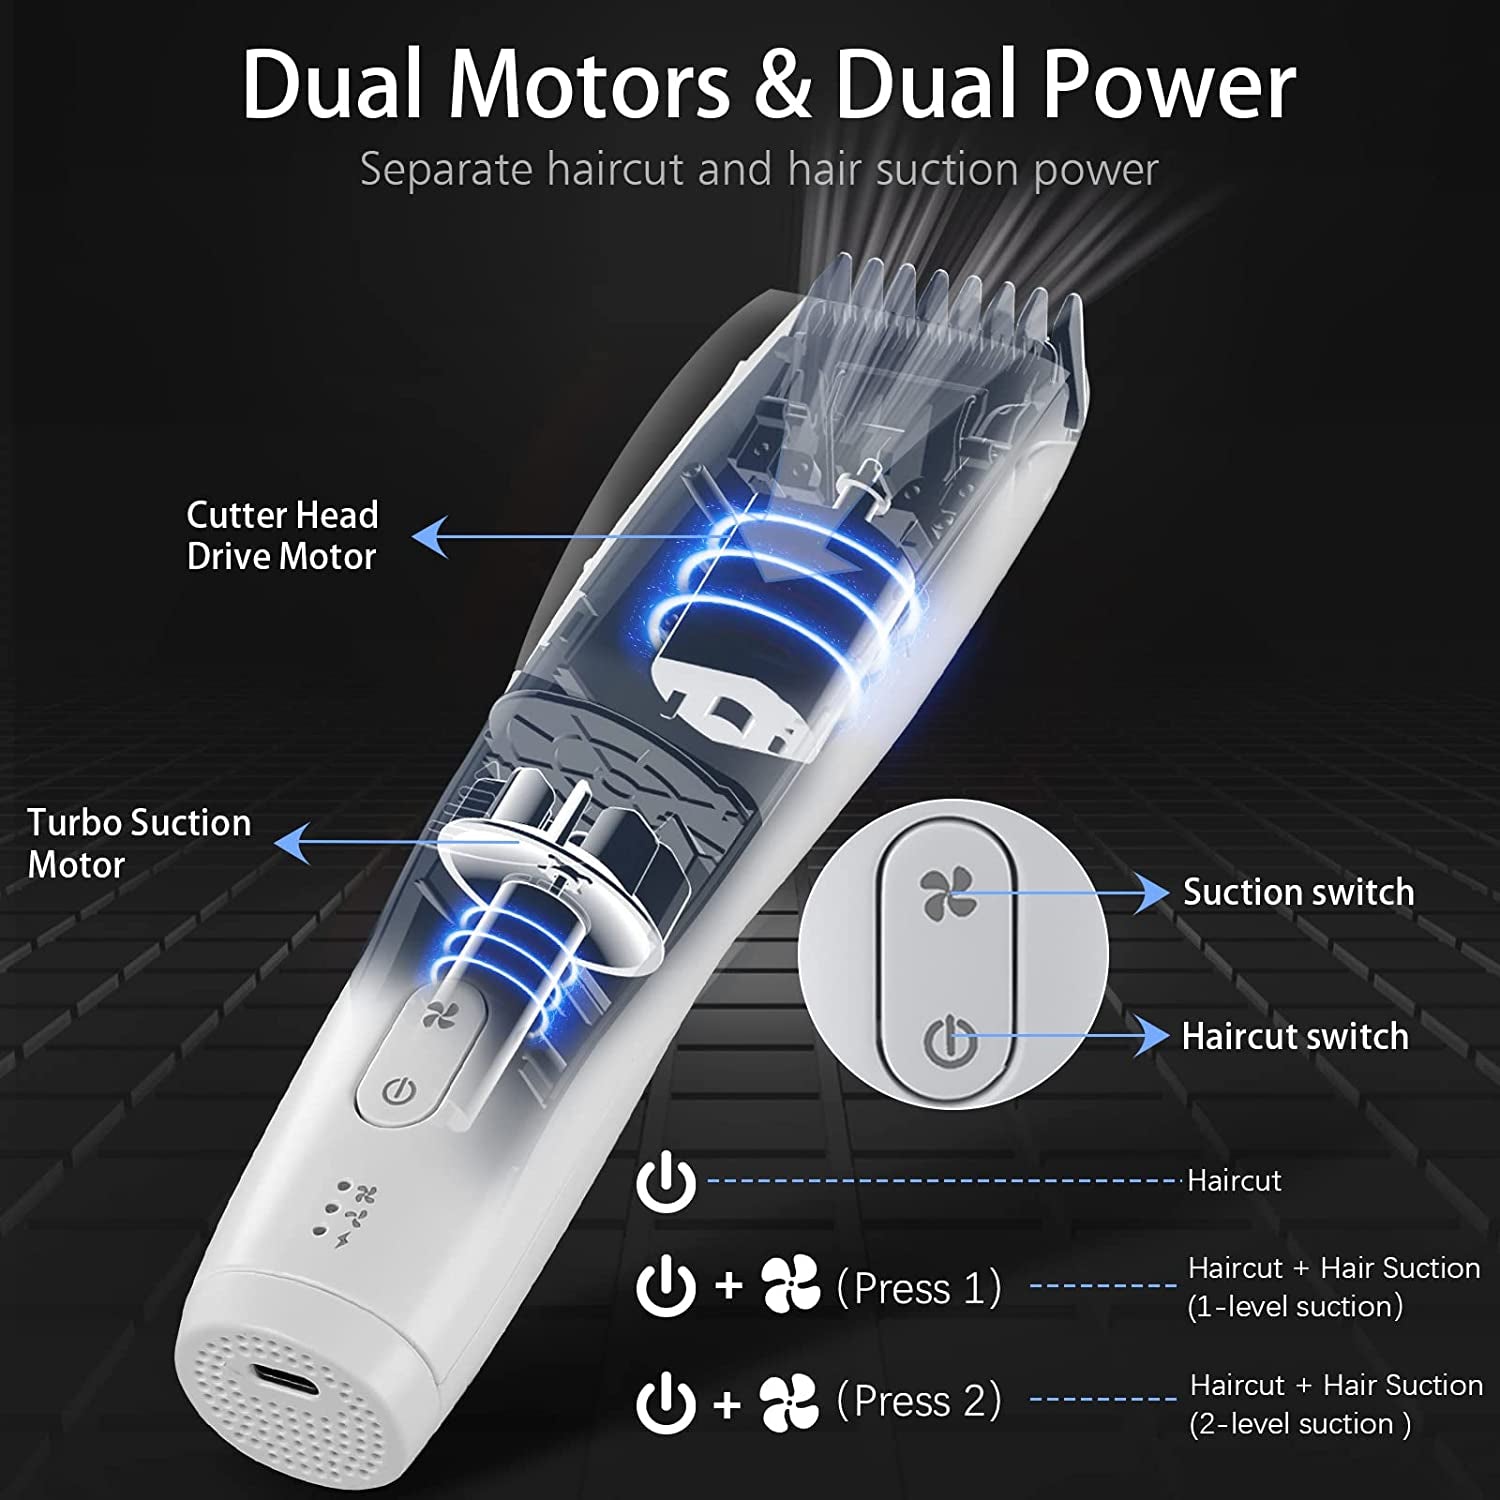 Body Hair Trimmer for Men with Vacuum Hair Suction, Replaceable Ceramic Blade Heads Groin Hair Trimmer for Skin Safety, Pubic Hair Trimmer Waterproof Wet and Dry, Ultimate Male Hygiene Razor